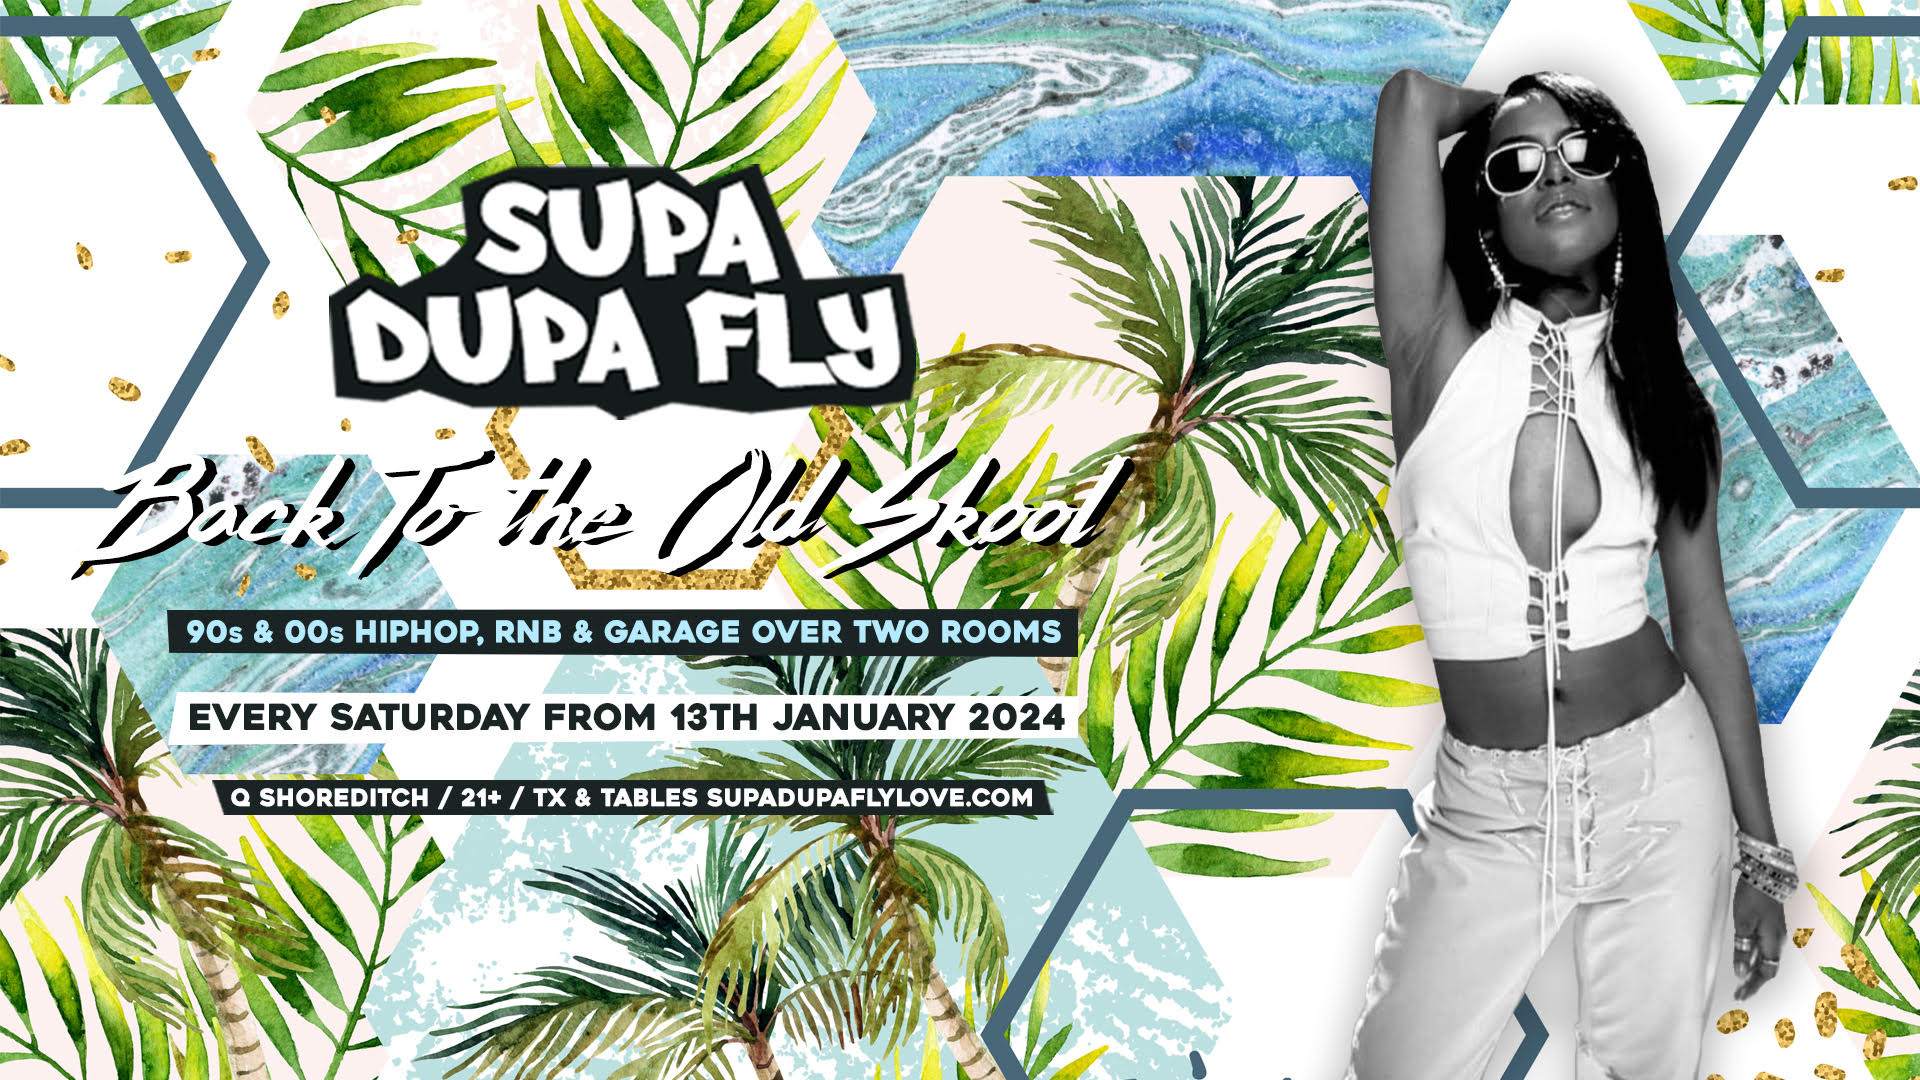 Supa Dupa Fly x Back To The Old Skool w/ DJ Luck & MC Neat - フライヤー表